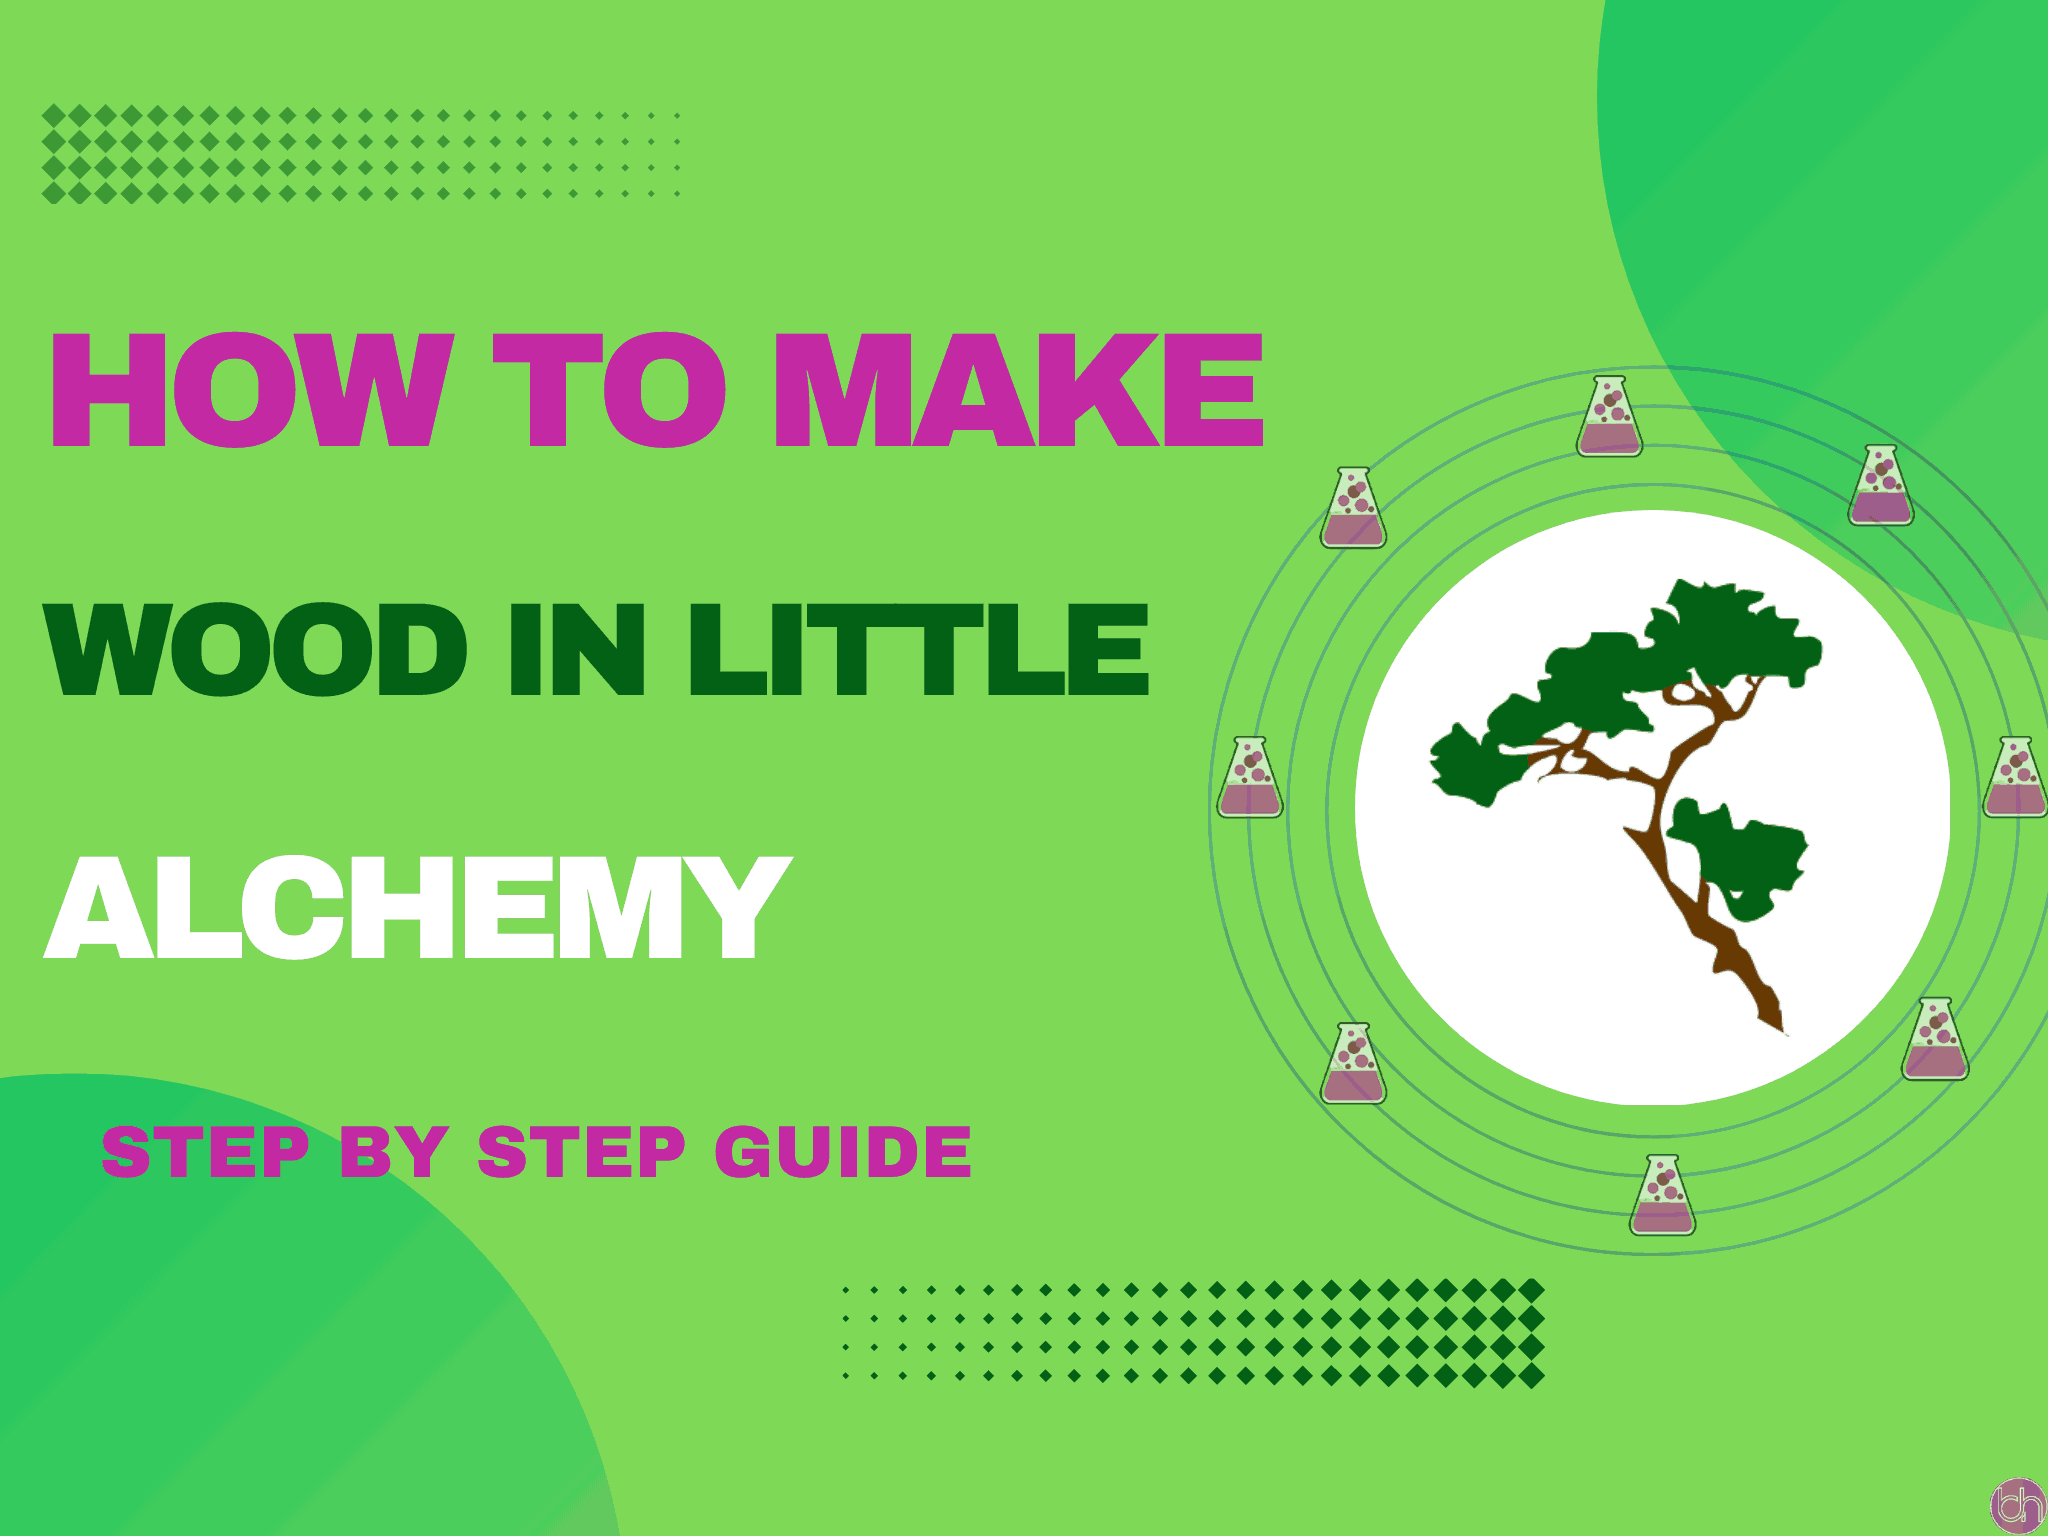 How to make Tree in Little Alchemy